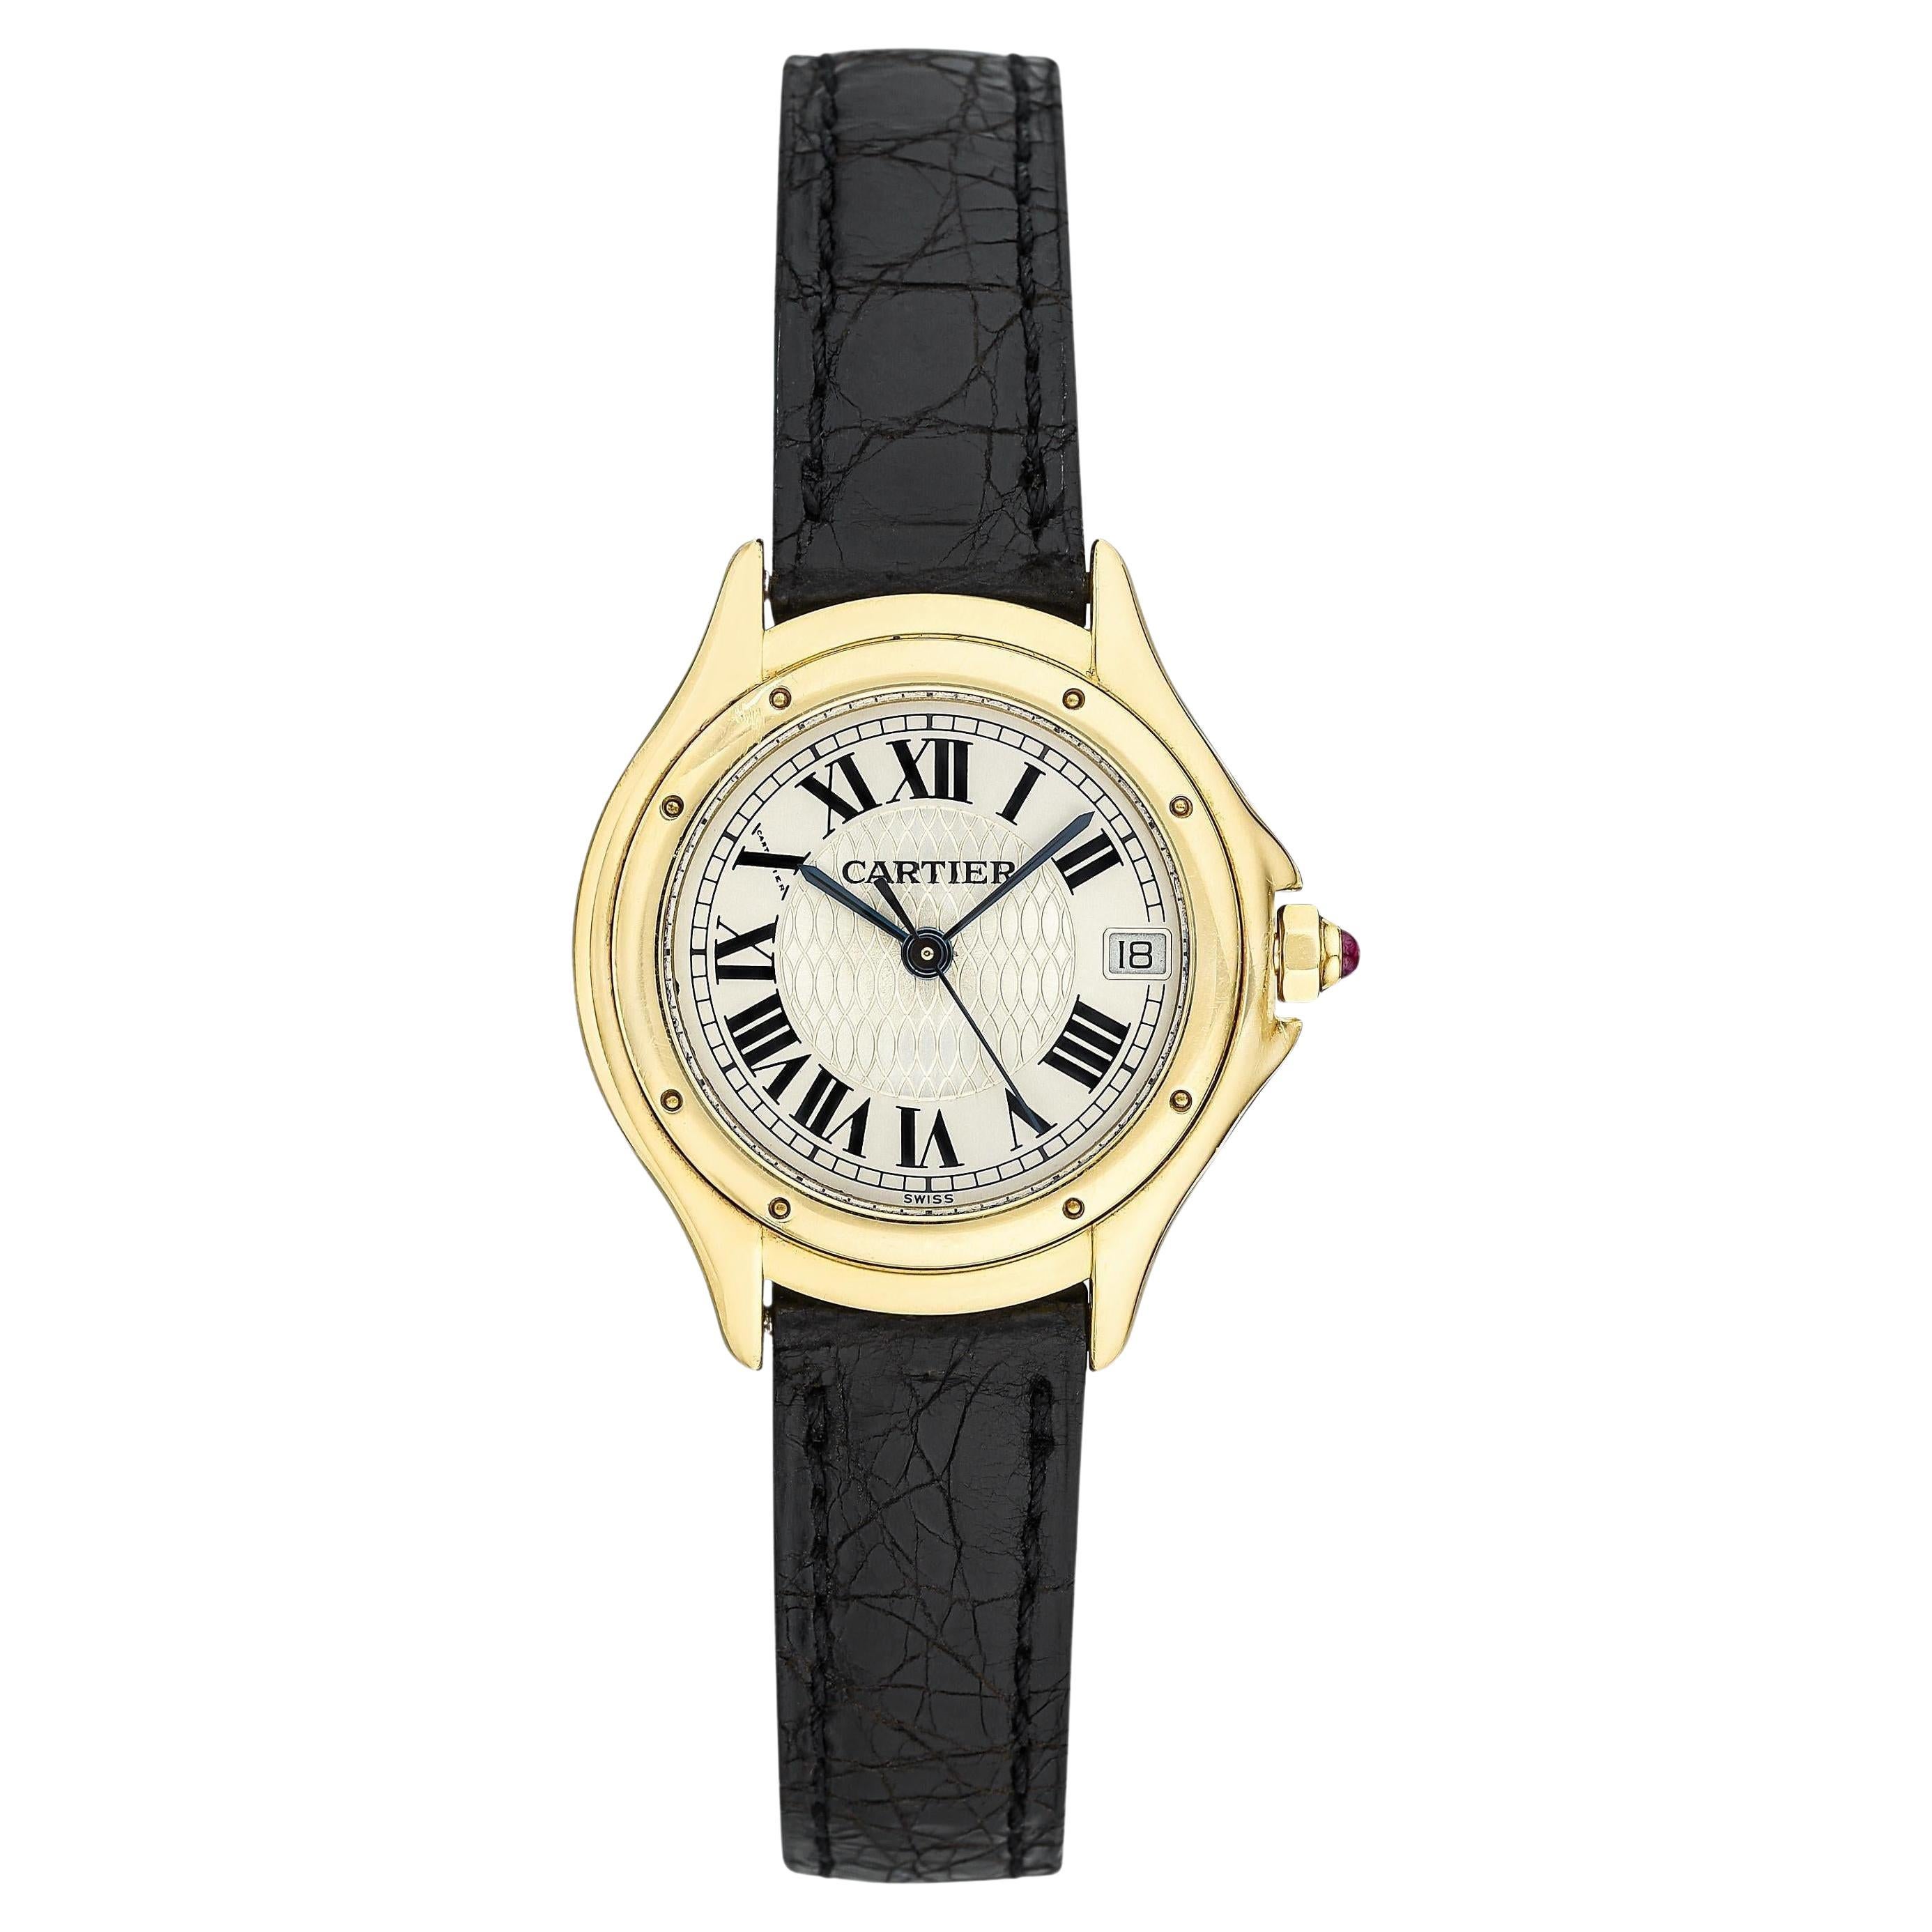 Limited Edition Cartier Panthere Watch 18K Yellow Gold